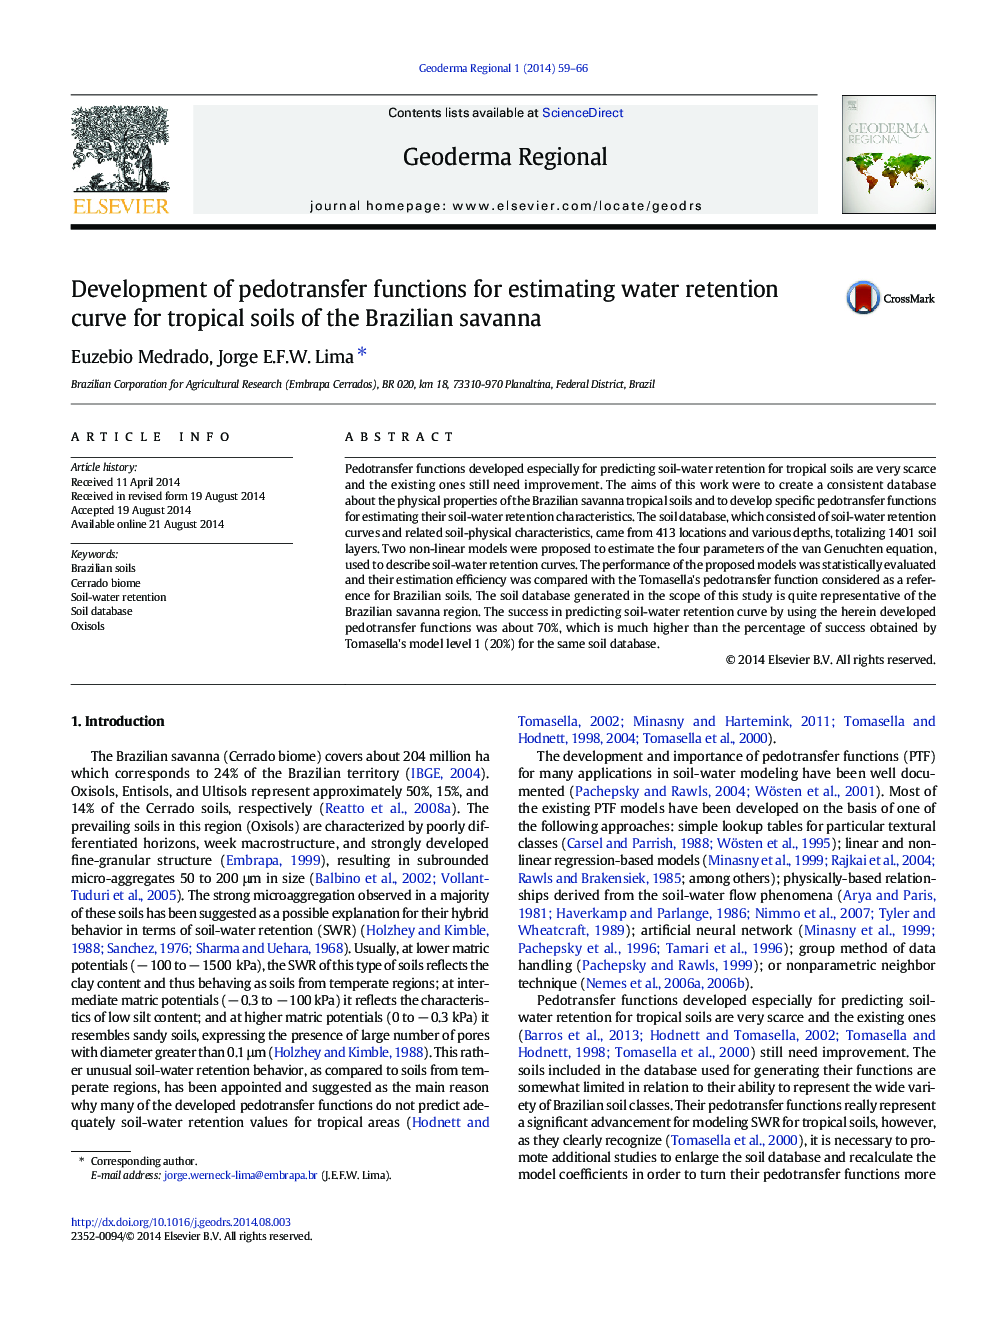 Development of pedotransfer functions for estimating water retention curve for tropical soils of the Brazilian savanna